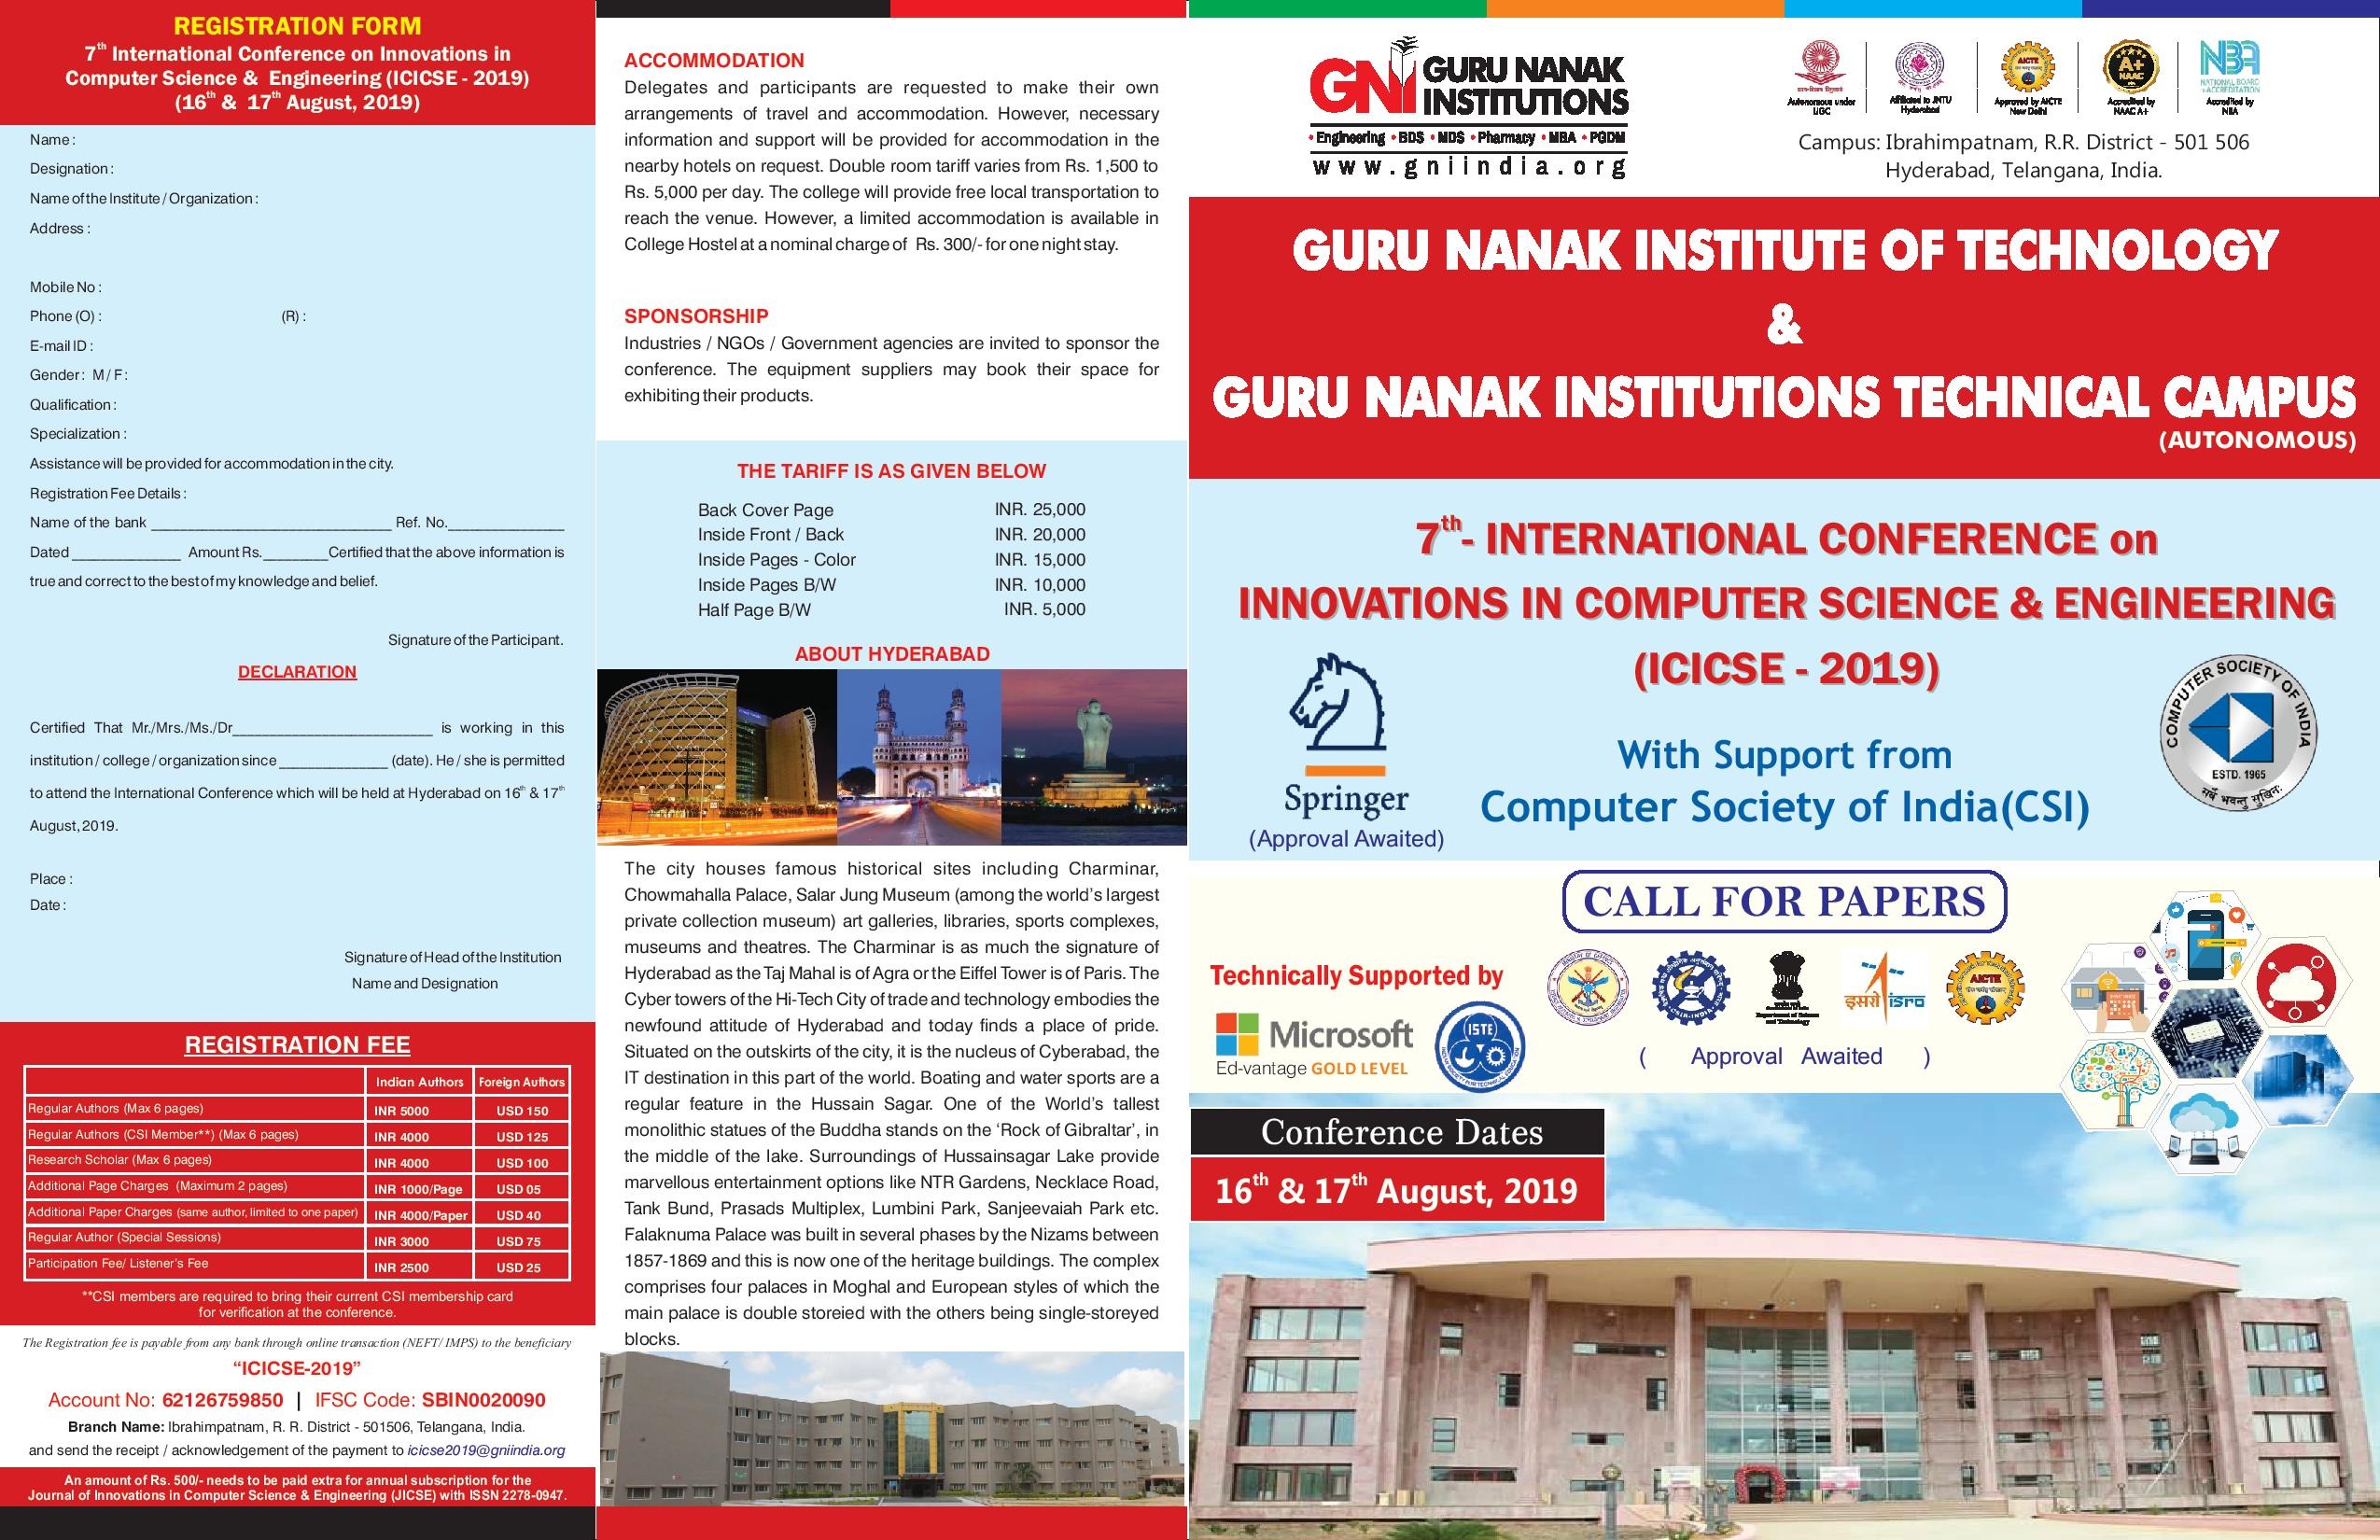 7th International Conference on Innovations in Computer Science & Engineering, Hyderabad, Telangana, India